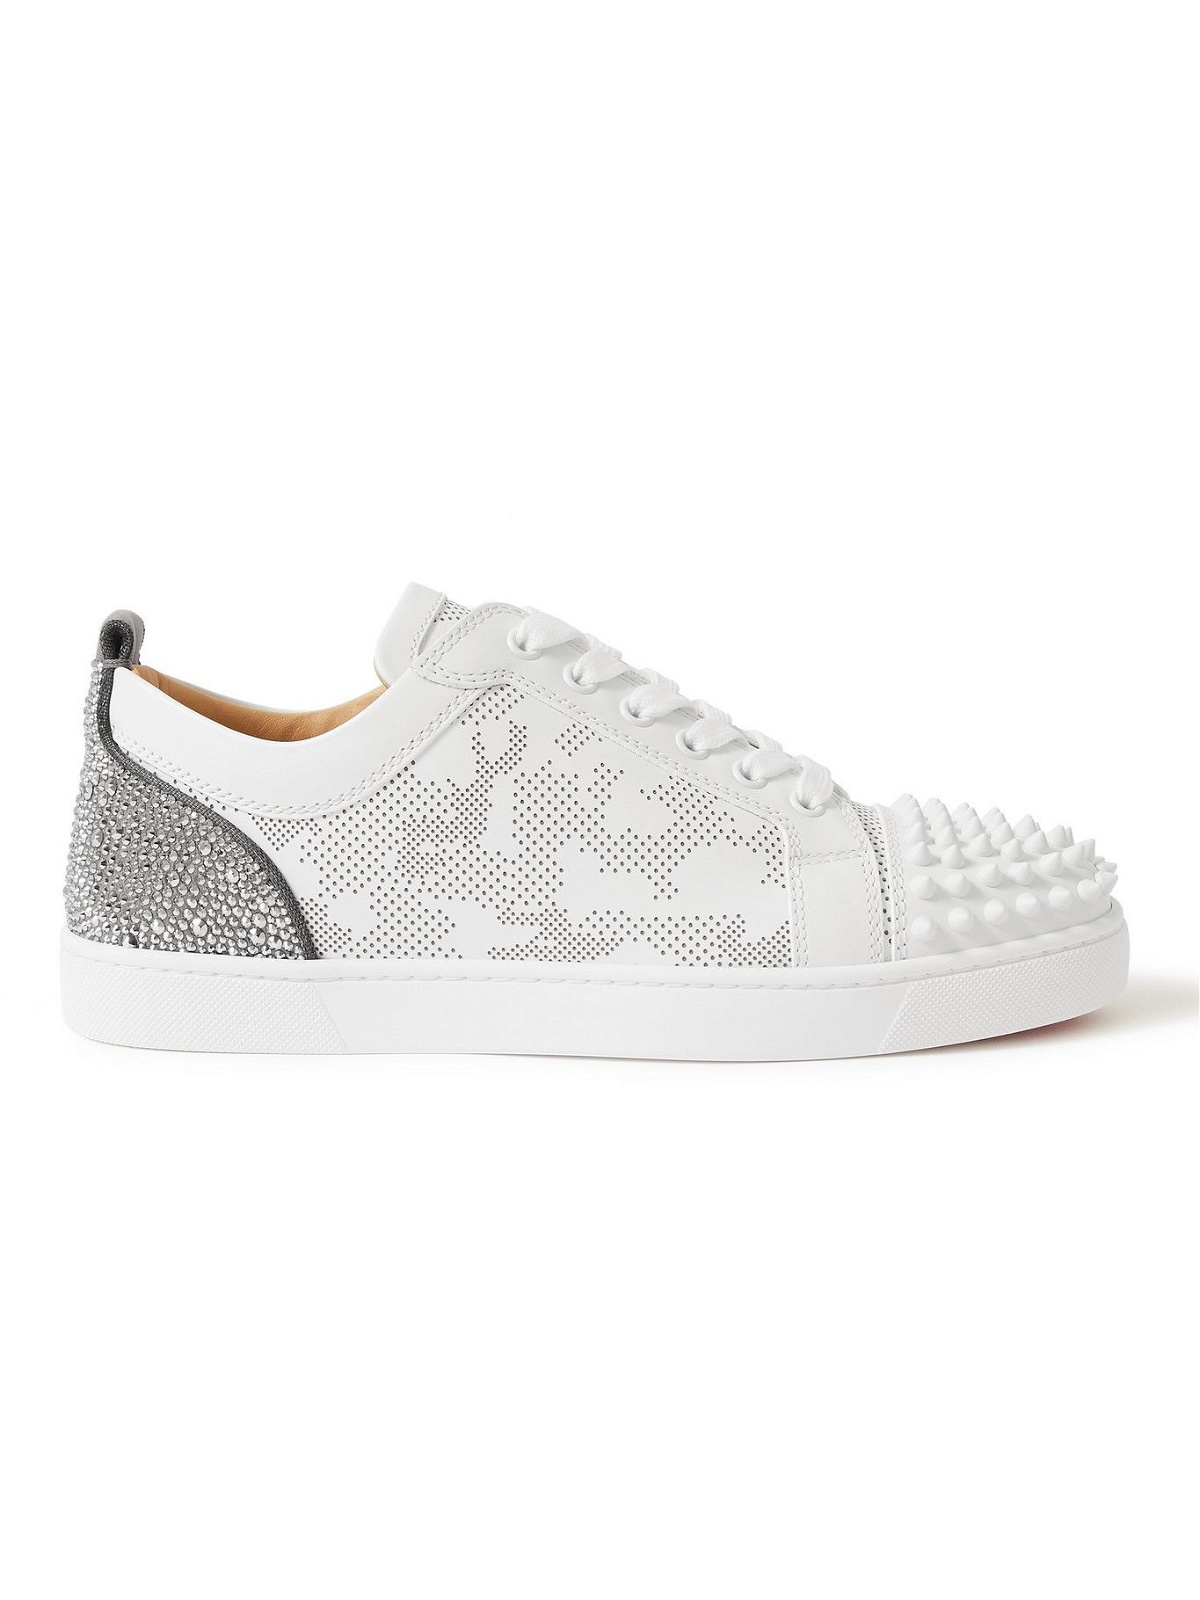 Christian Louboutin White Mesh Fabric and Leather Louis Junior